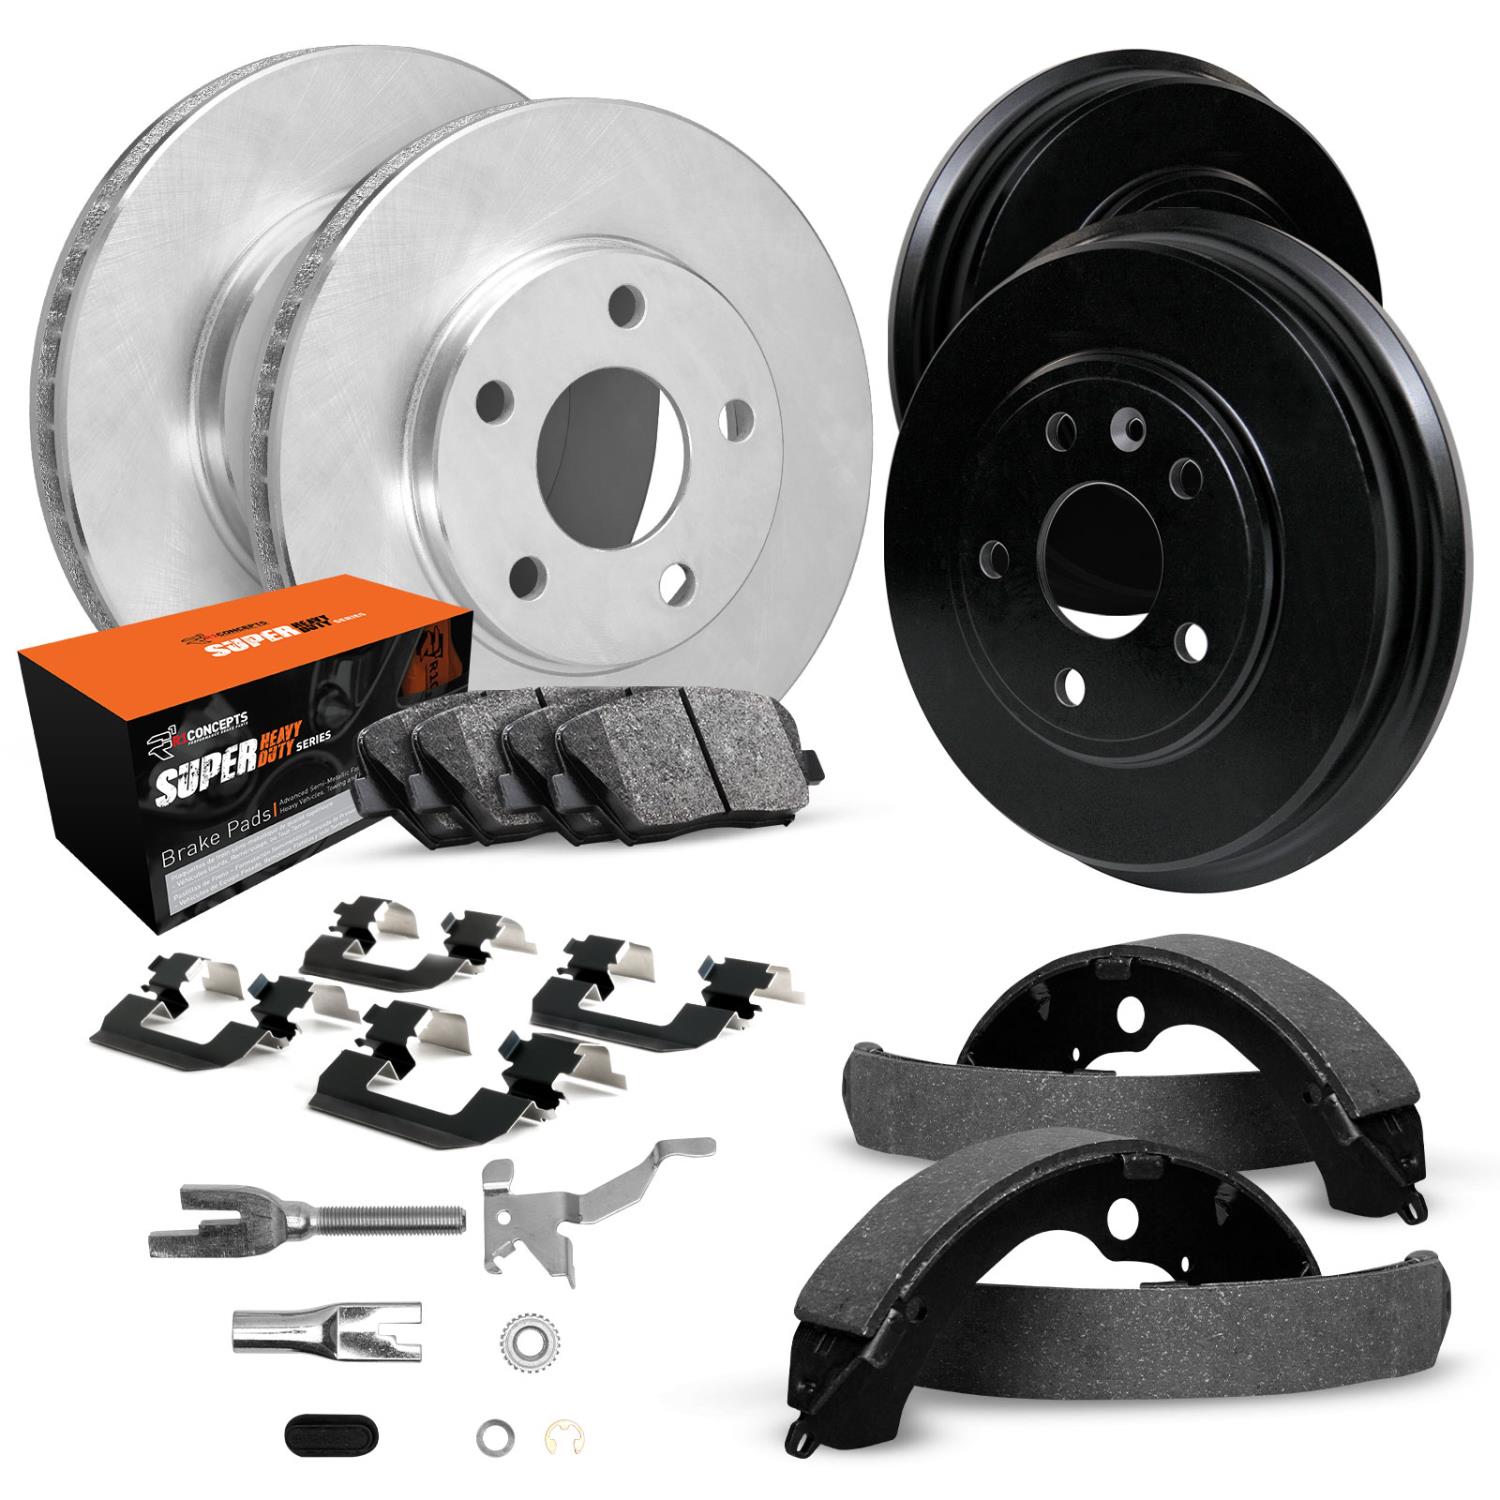 E-Line Blank Brake Rotor & Drum Set w/Super-Duty Pads, Shoes, Hardware, & Adjusters, 1975-1976 Ford/Lincoln/Mercury/Mazda